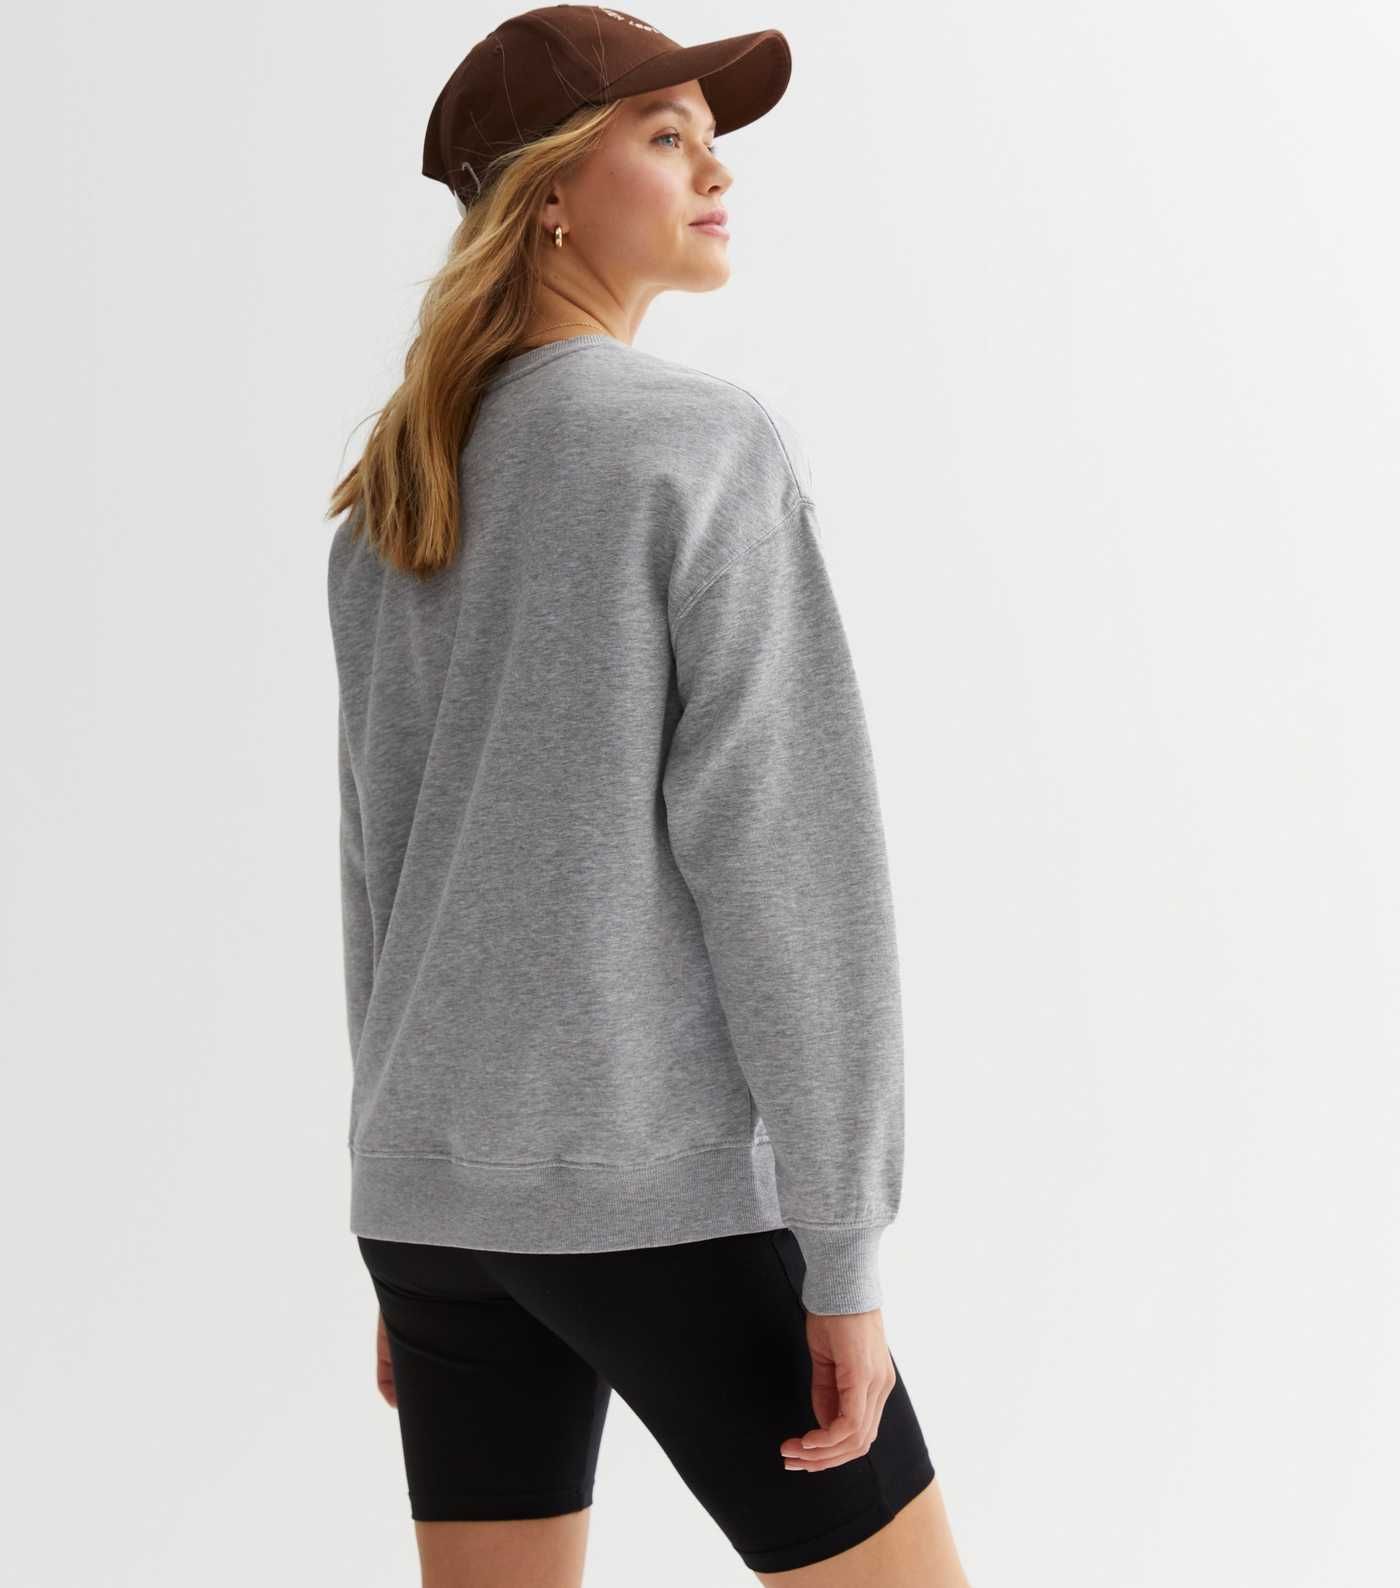 Pale Grey Paris Logo Crew Neck Sweatshirt
						
						Add to Saved Items
						Remove from Saved... | New Look (UK)